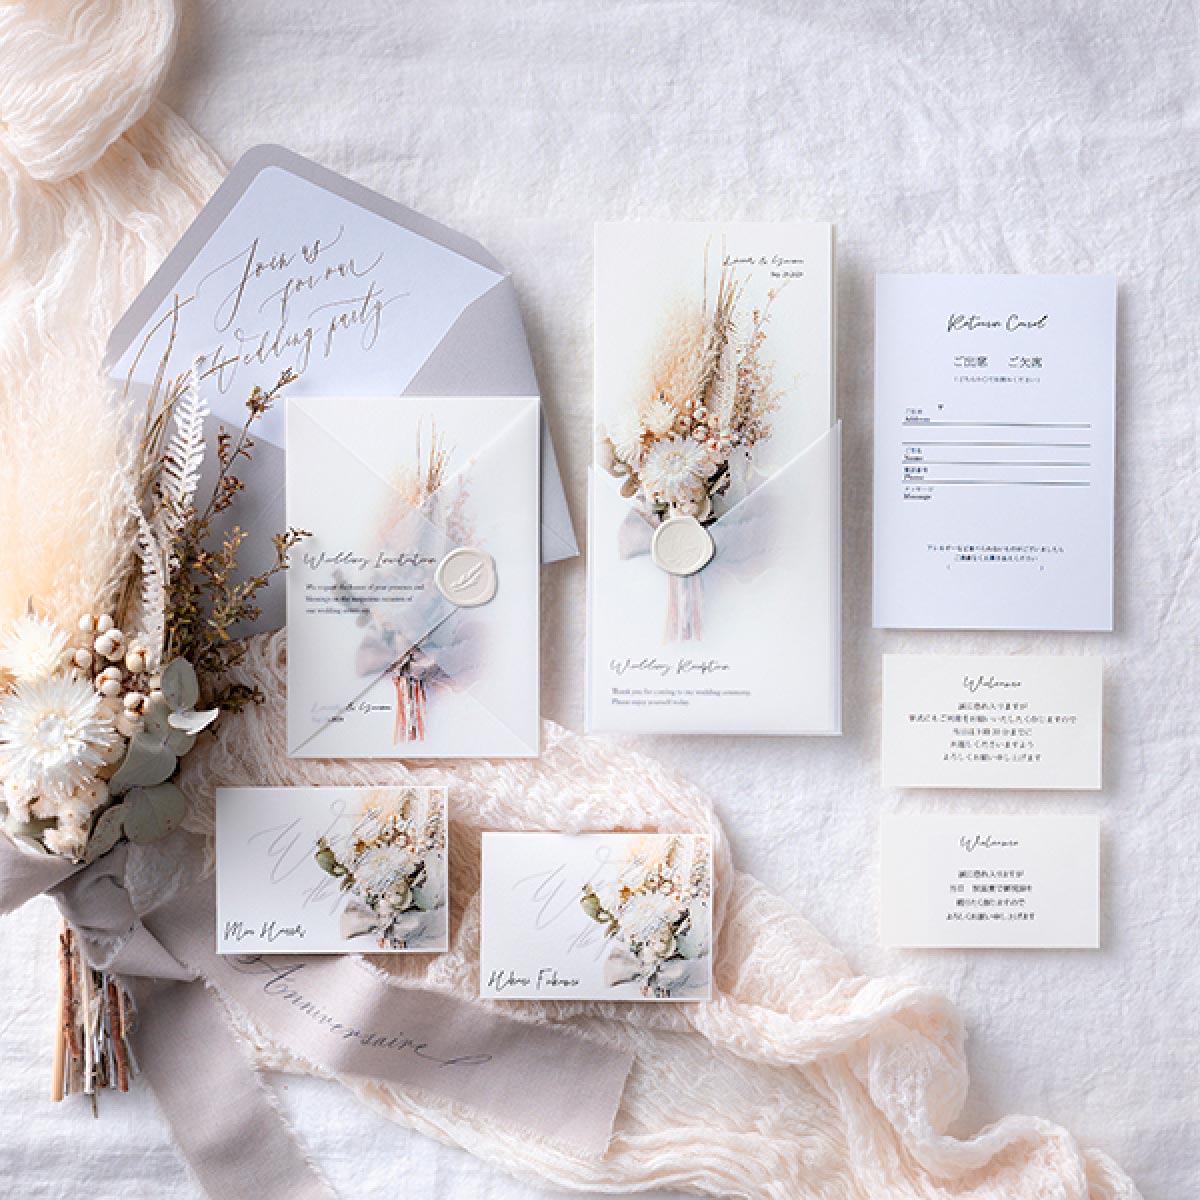 Piary Wedding Paper Item Collection ペーパーアイテムならpiary ピアリー